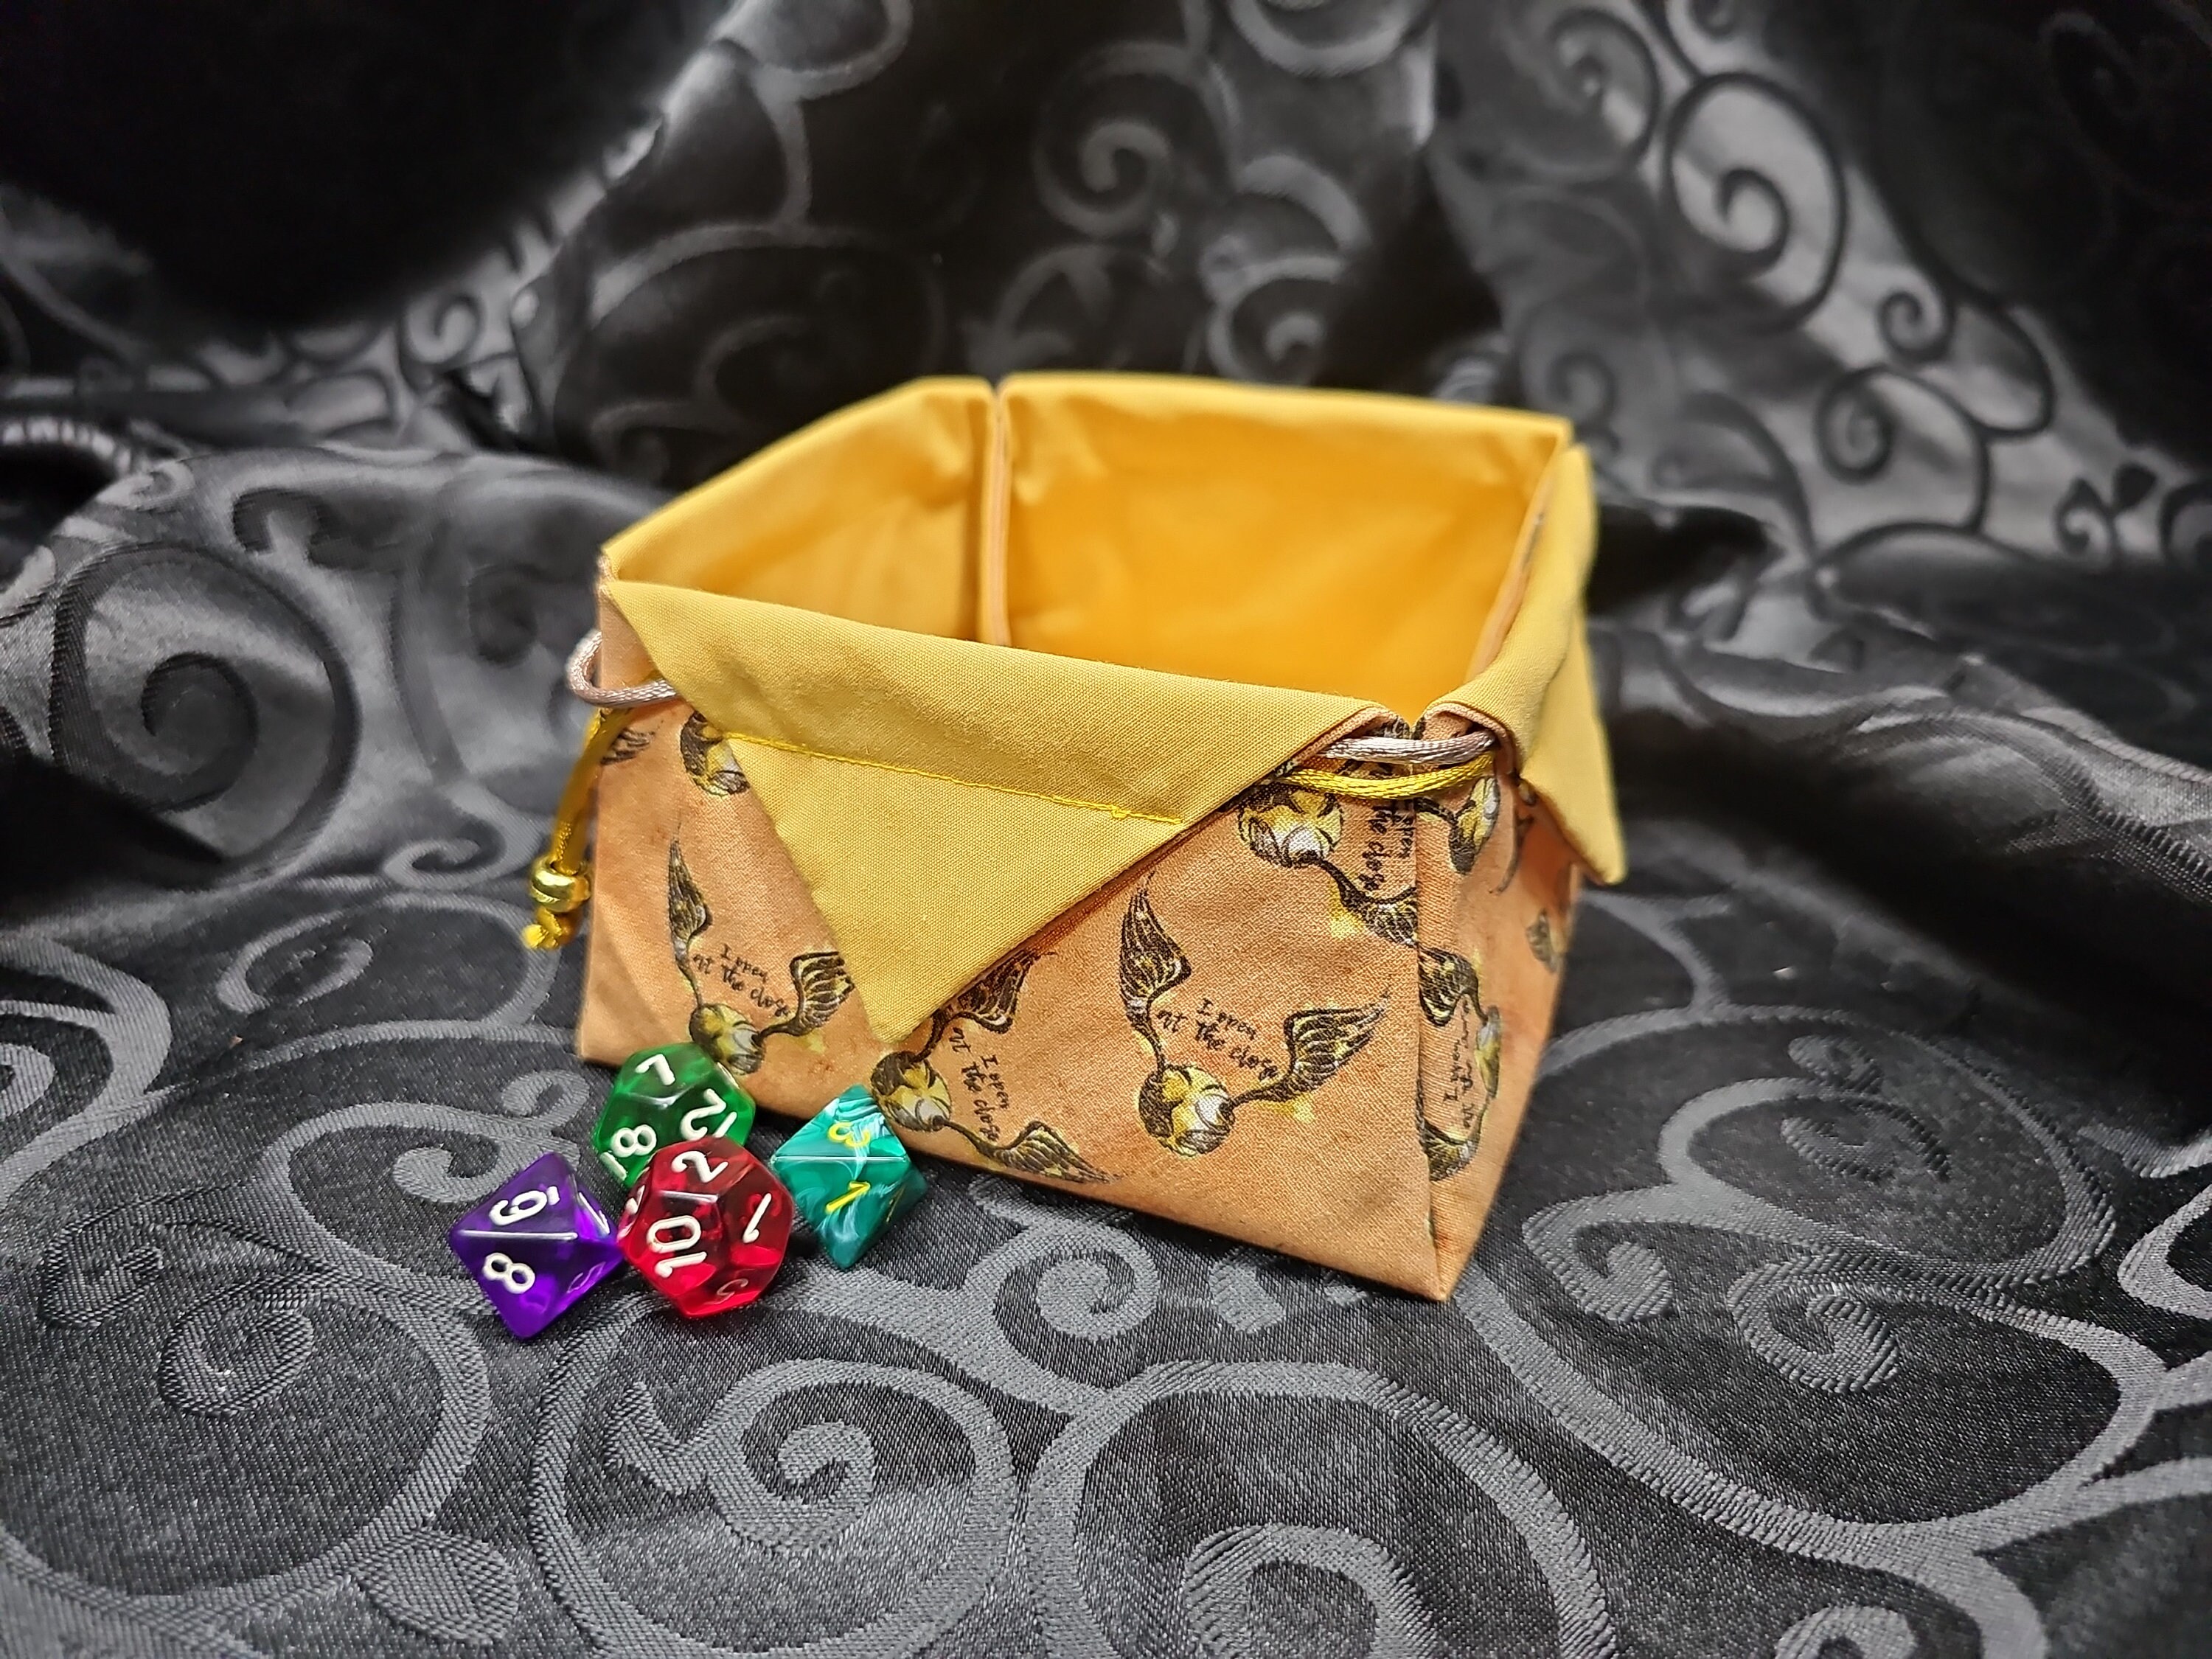 Buy Golden Snitch Bag Online In India -  India